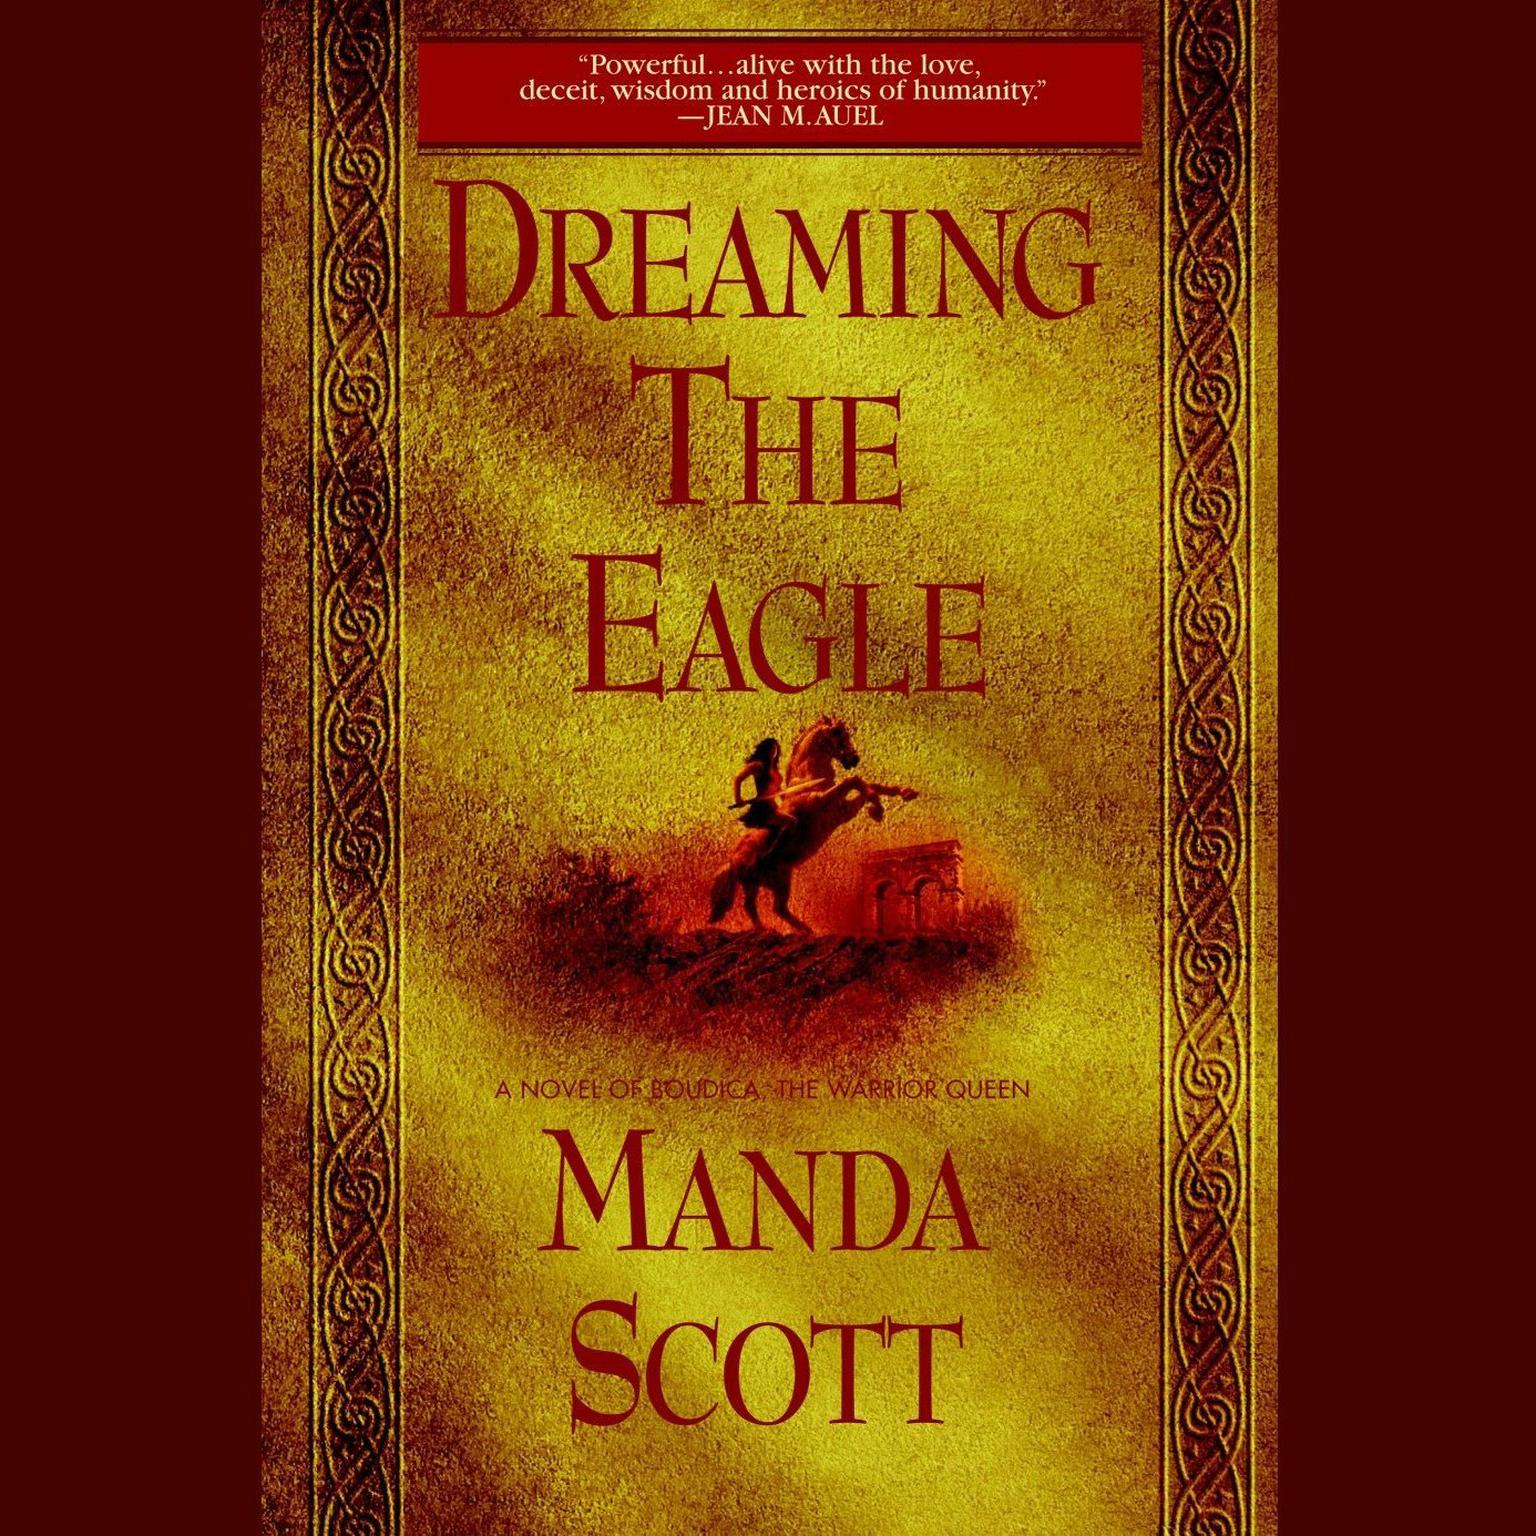 Dreaming the Eagle (Abridged): A Novel of Boudica, The Warrior Queen Audiobook, by Manda Scott